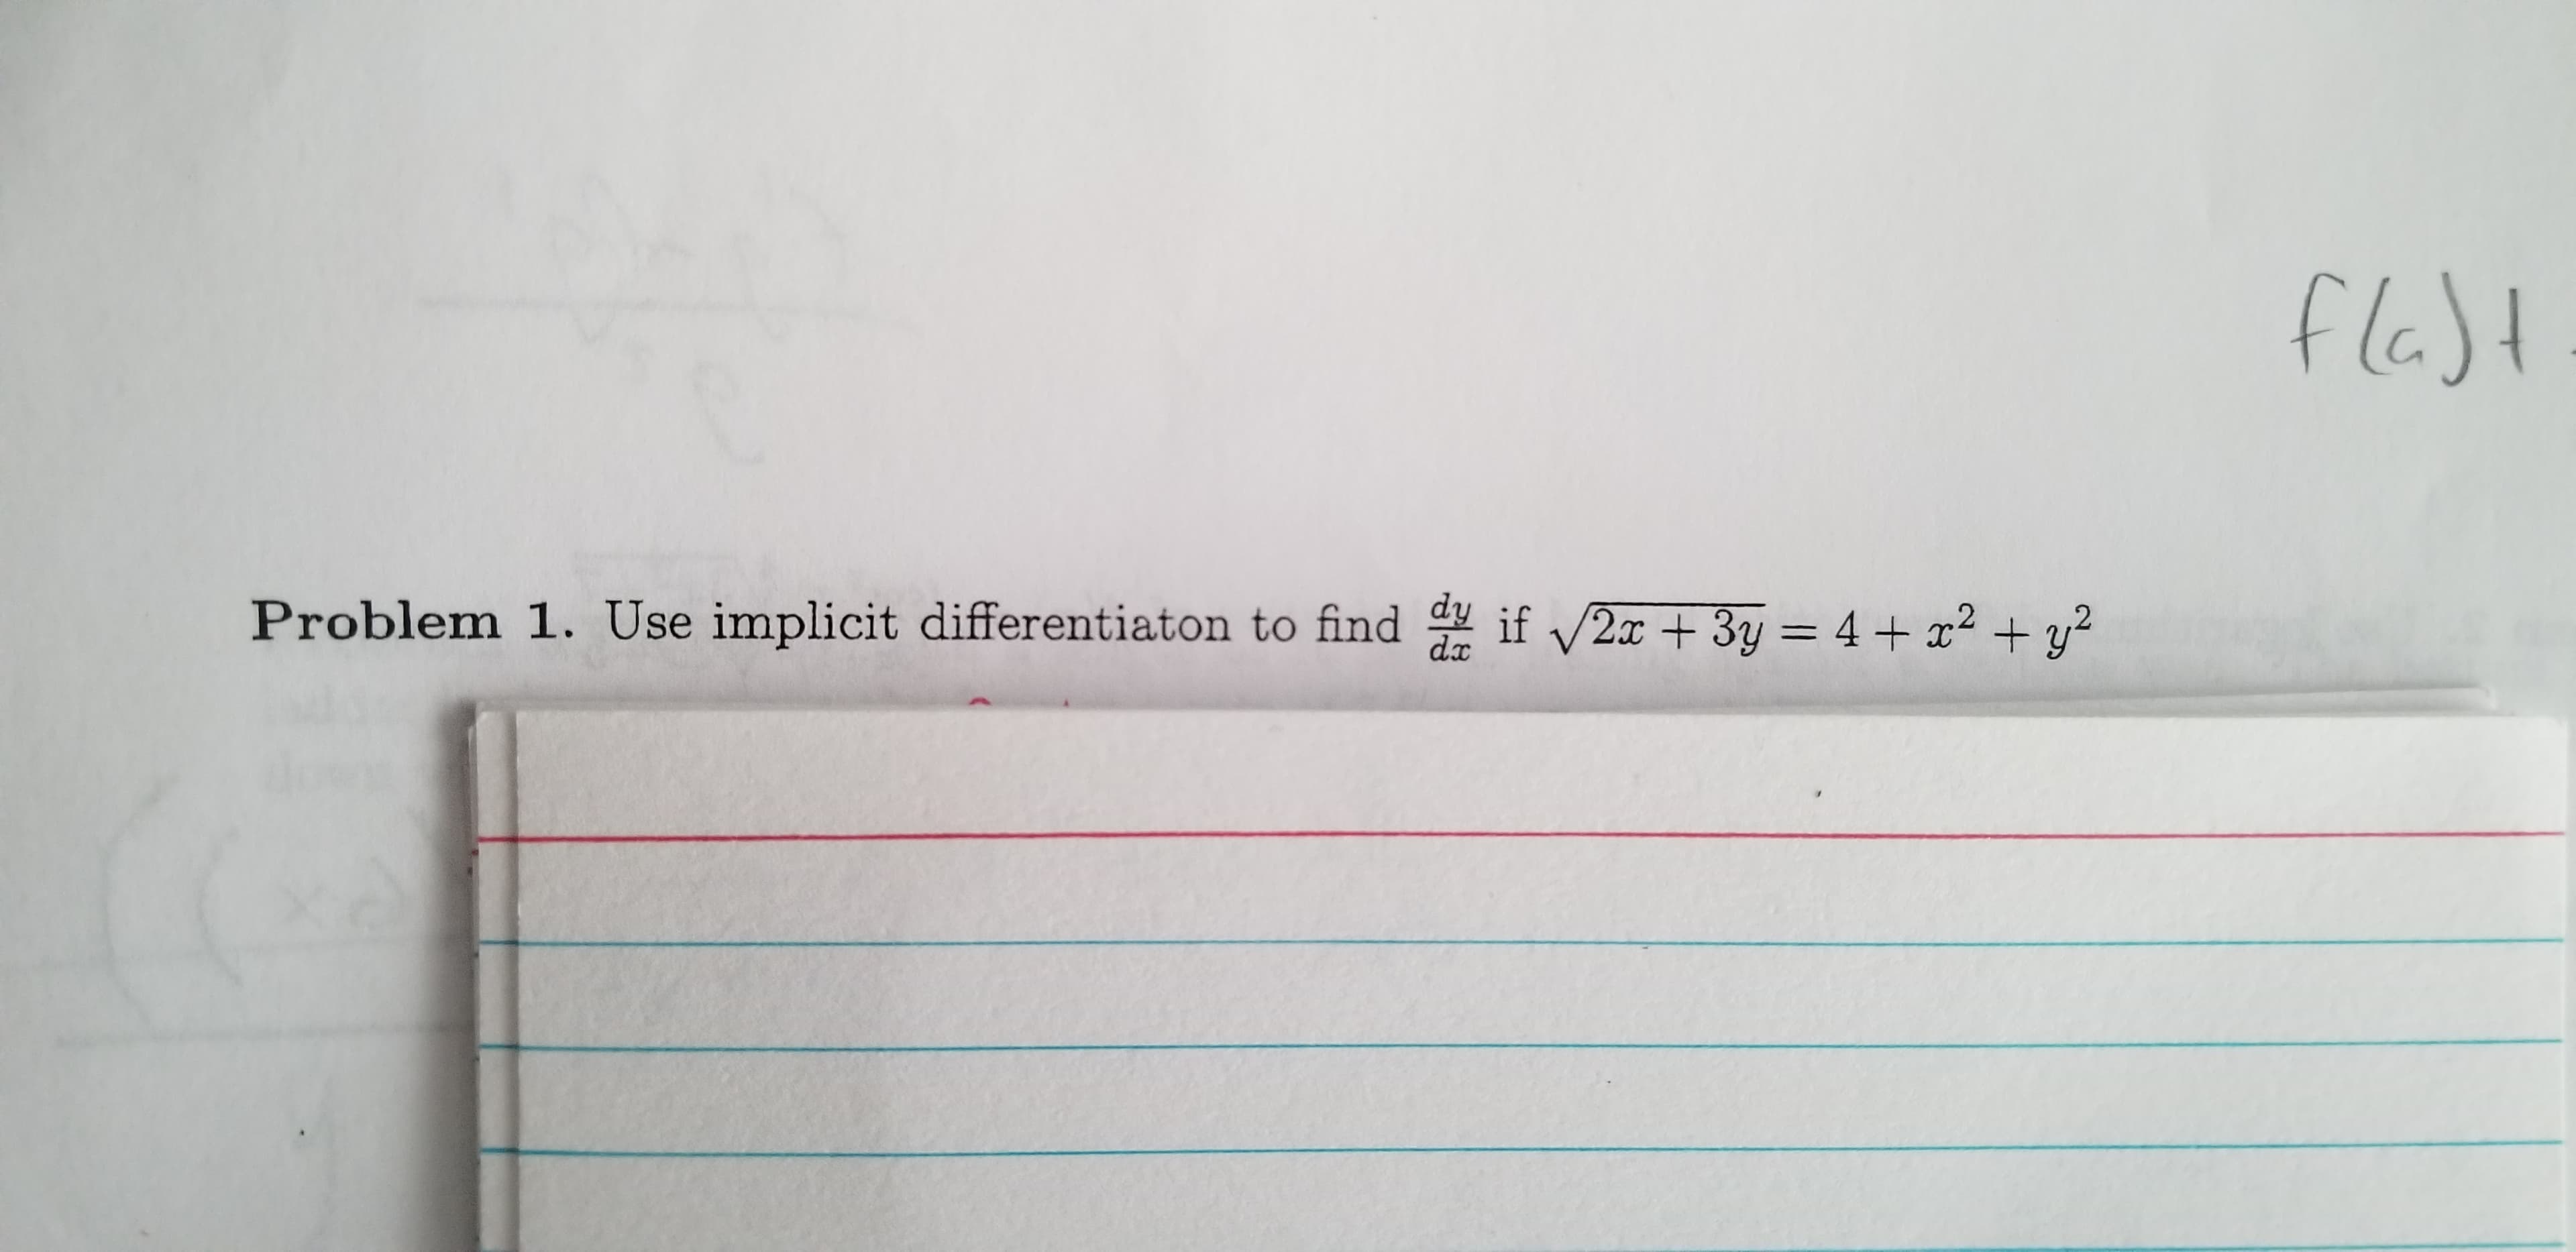 fla)t
Problem 1. Use implicit differentiaton to find
if /2x + 3y = 4 + x² + y?
%3D
dx
